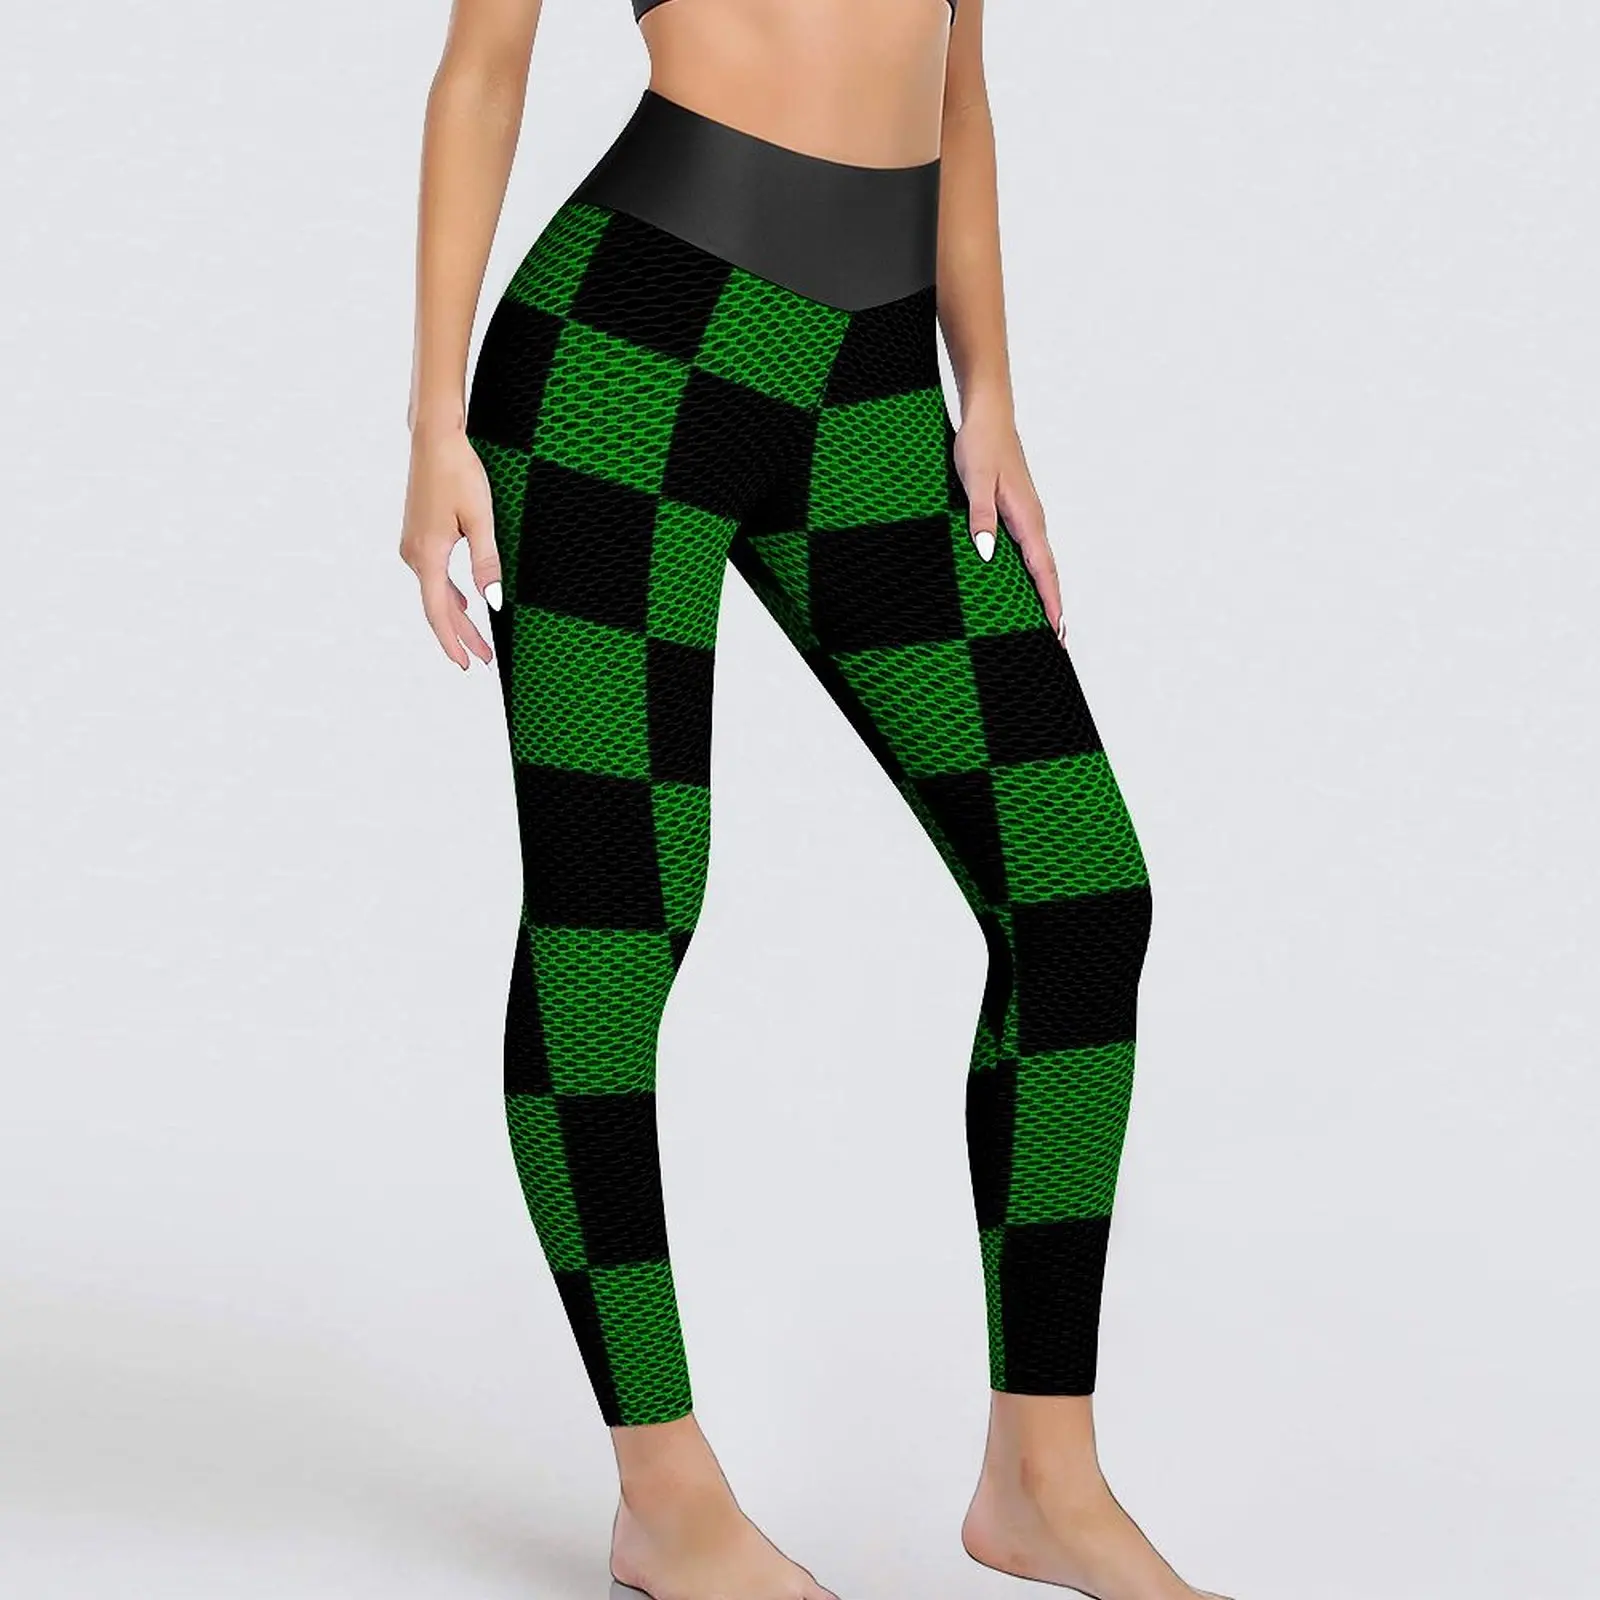 

Black And Green Two Tone Yoga Pants Sexy Mod Checkers Printed Leggings Push Up Fitness Leggins Women Cute Stretchy Sports Tights